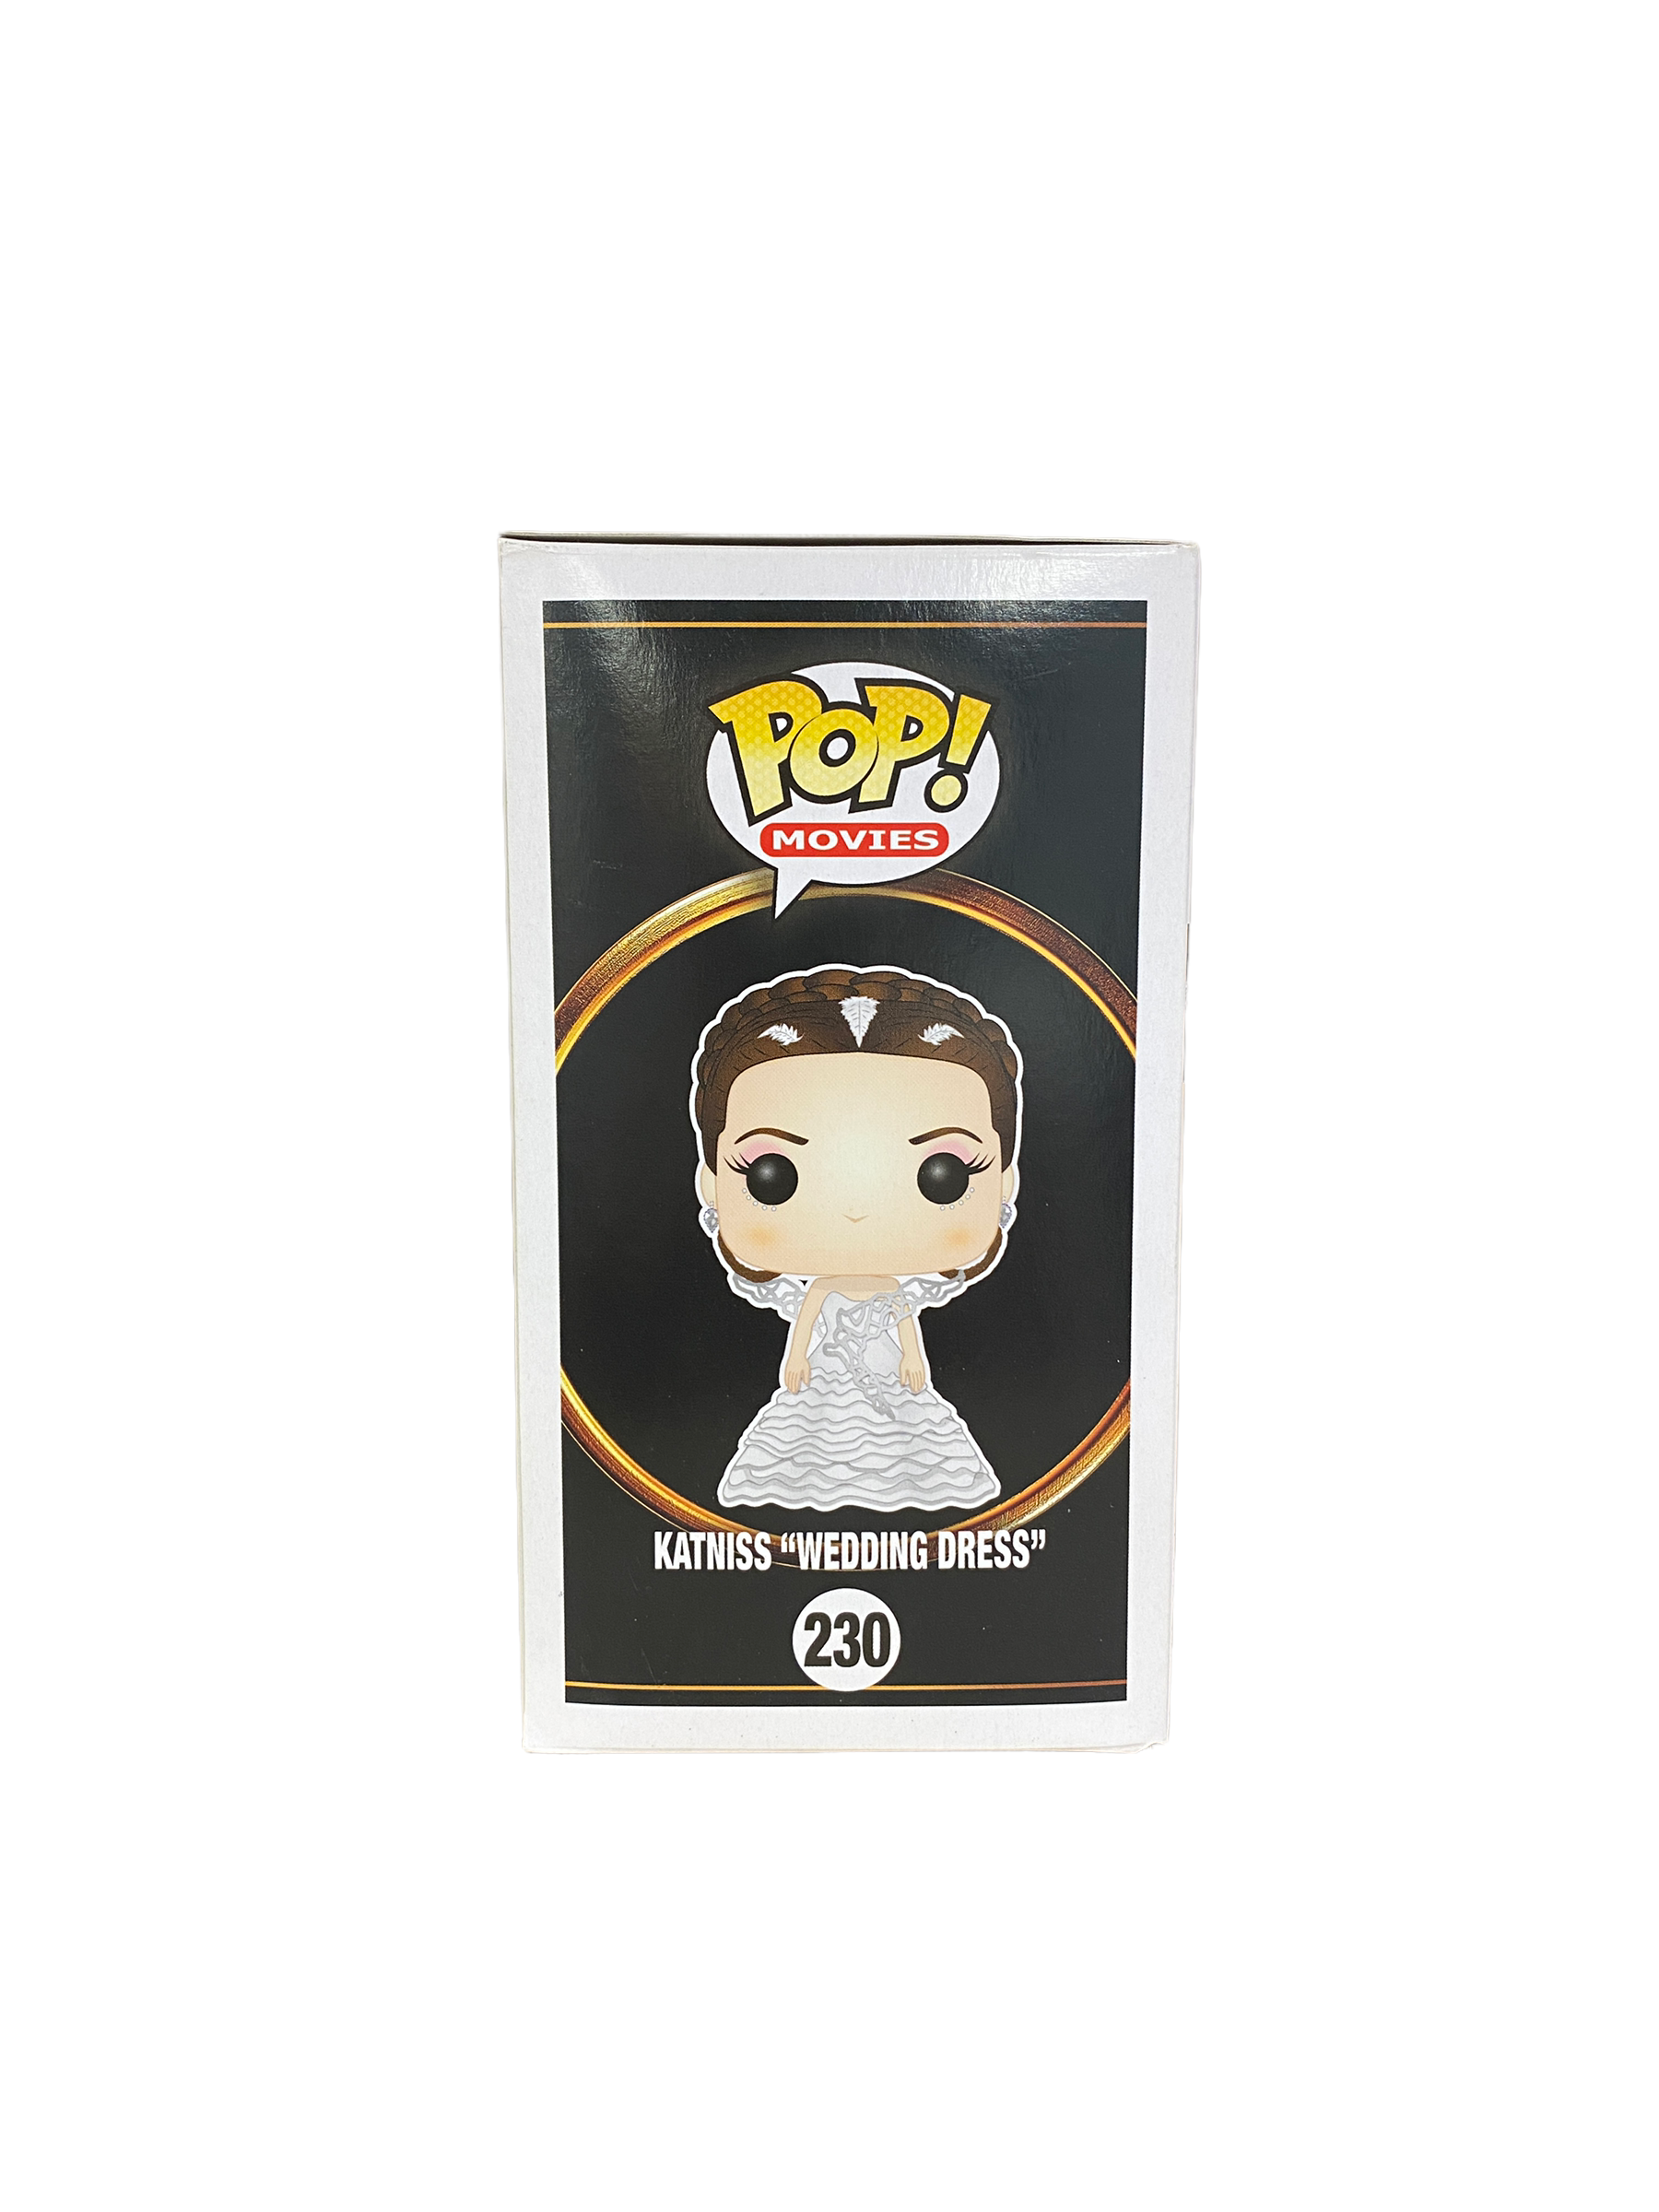 Katniss "Wedding Dress" #230 Funko Pop! - The World Of The Hunger Games - 2015 Pop! - Condition 7/10